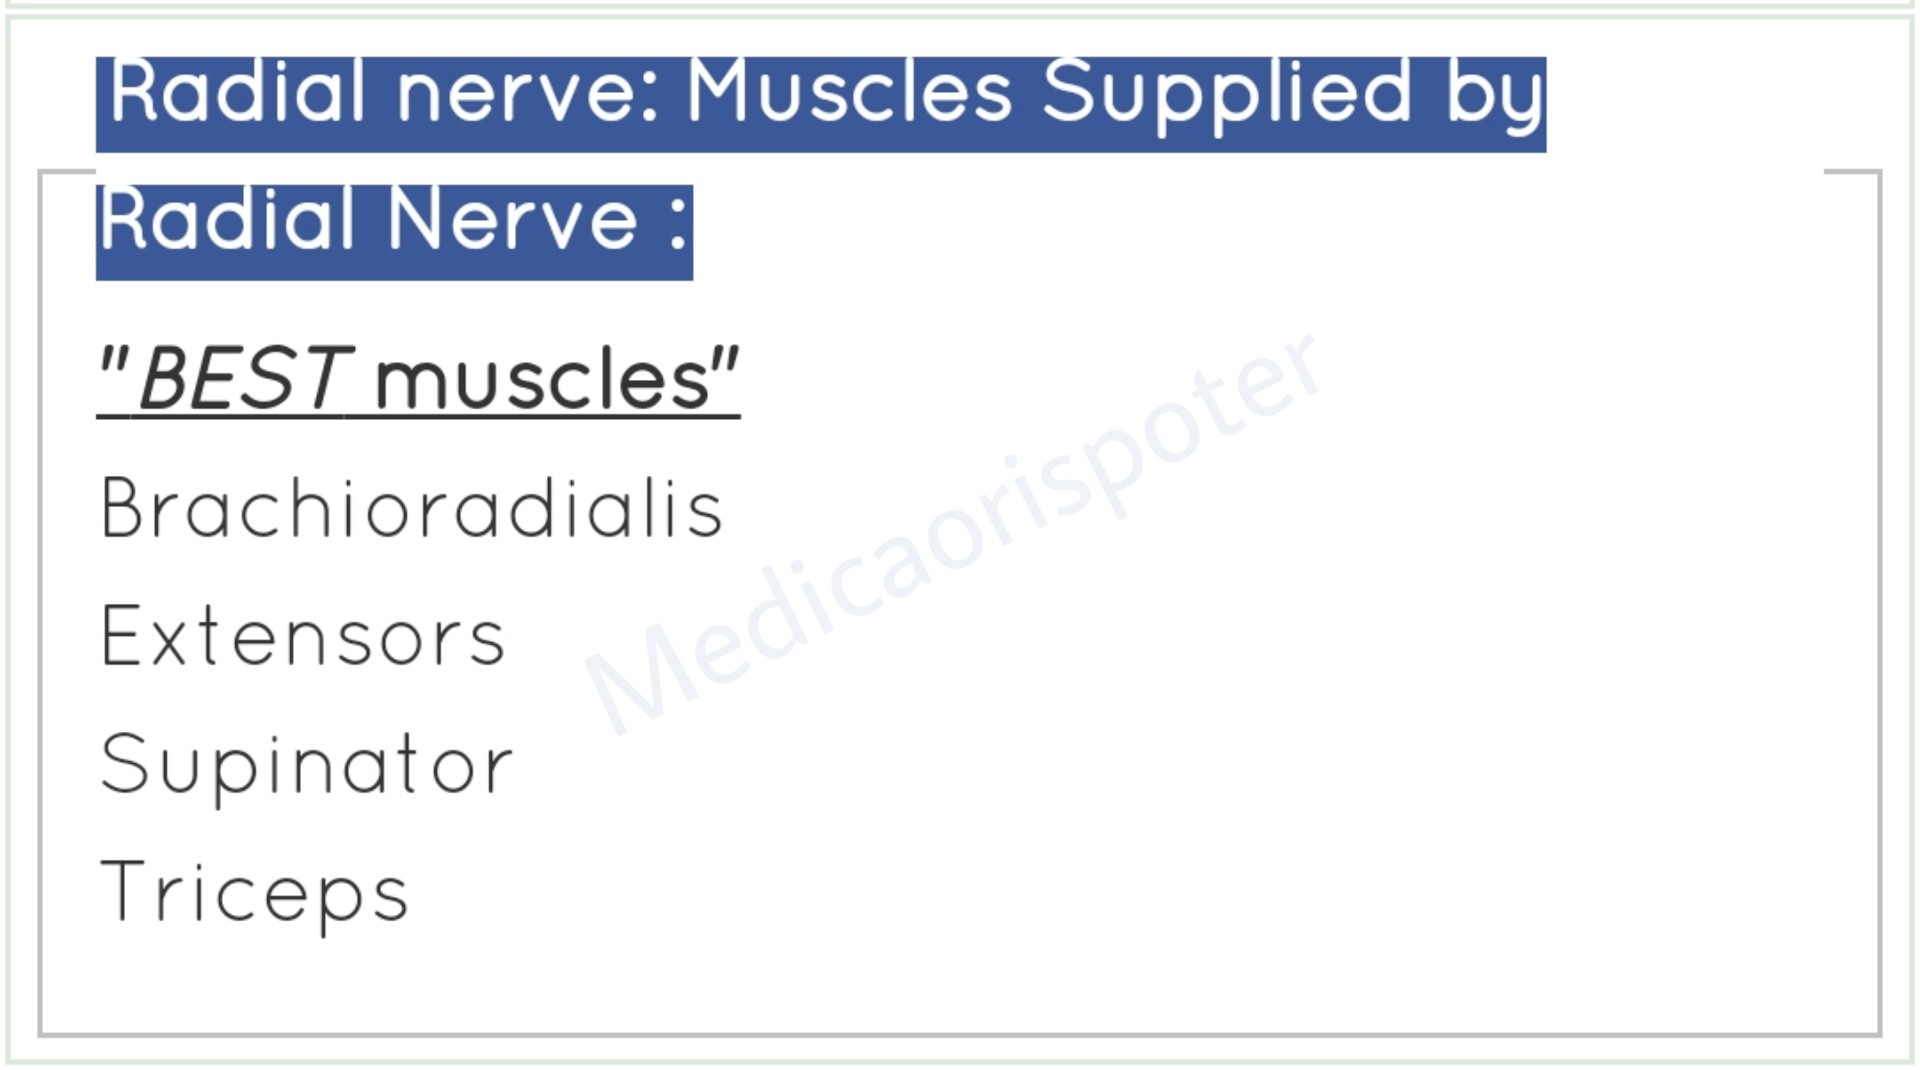 Muscles Supplied by Radial Nerve